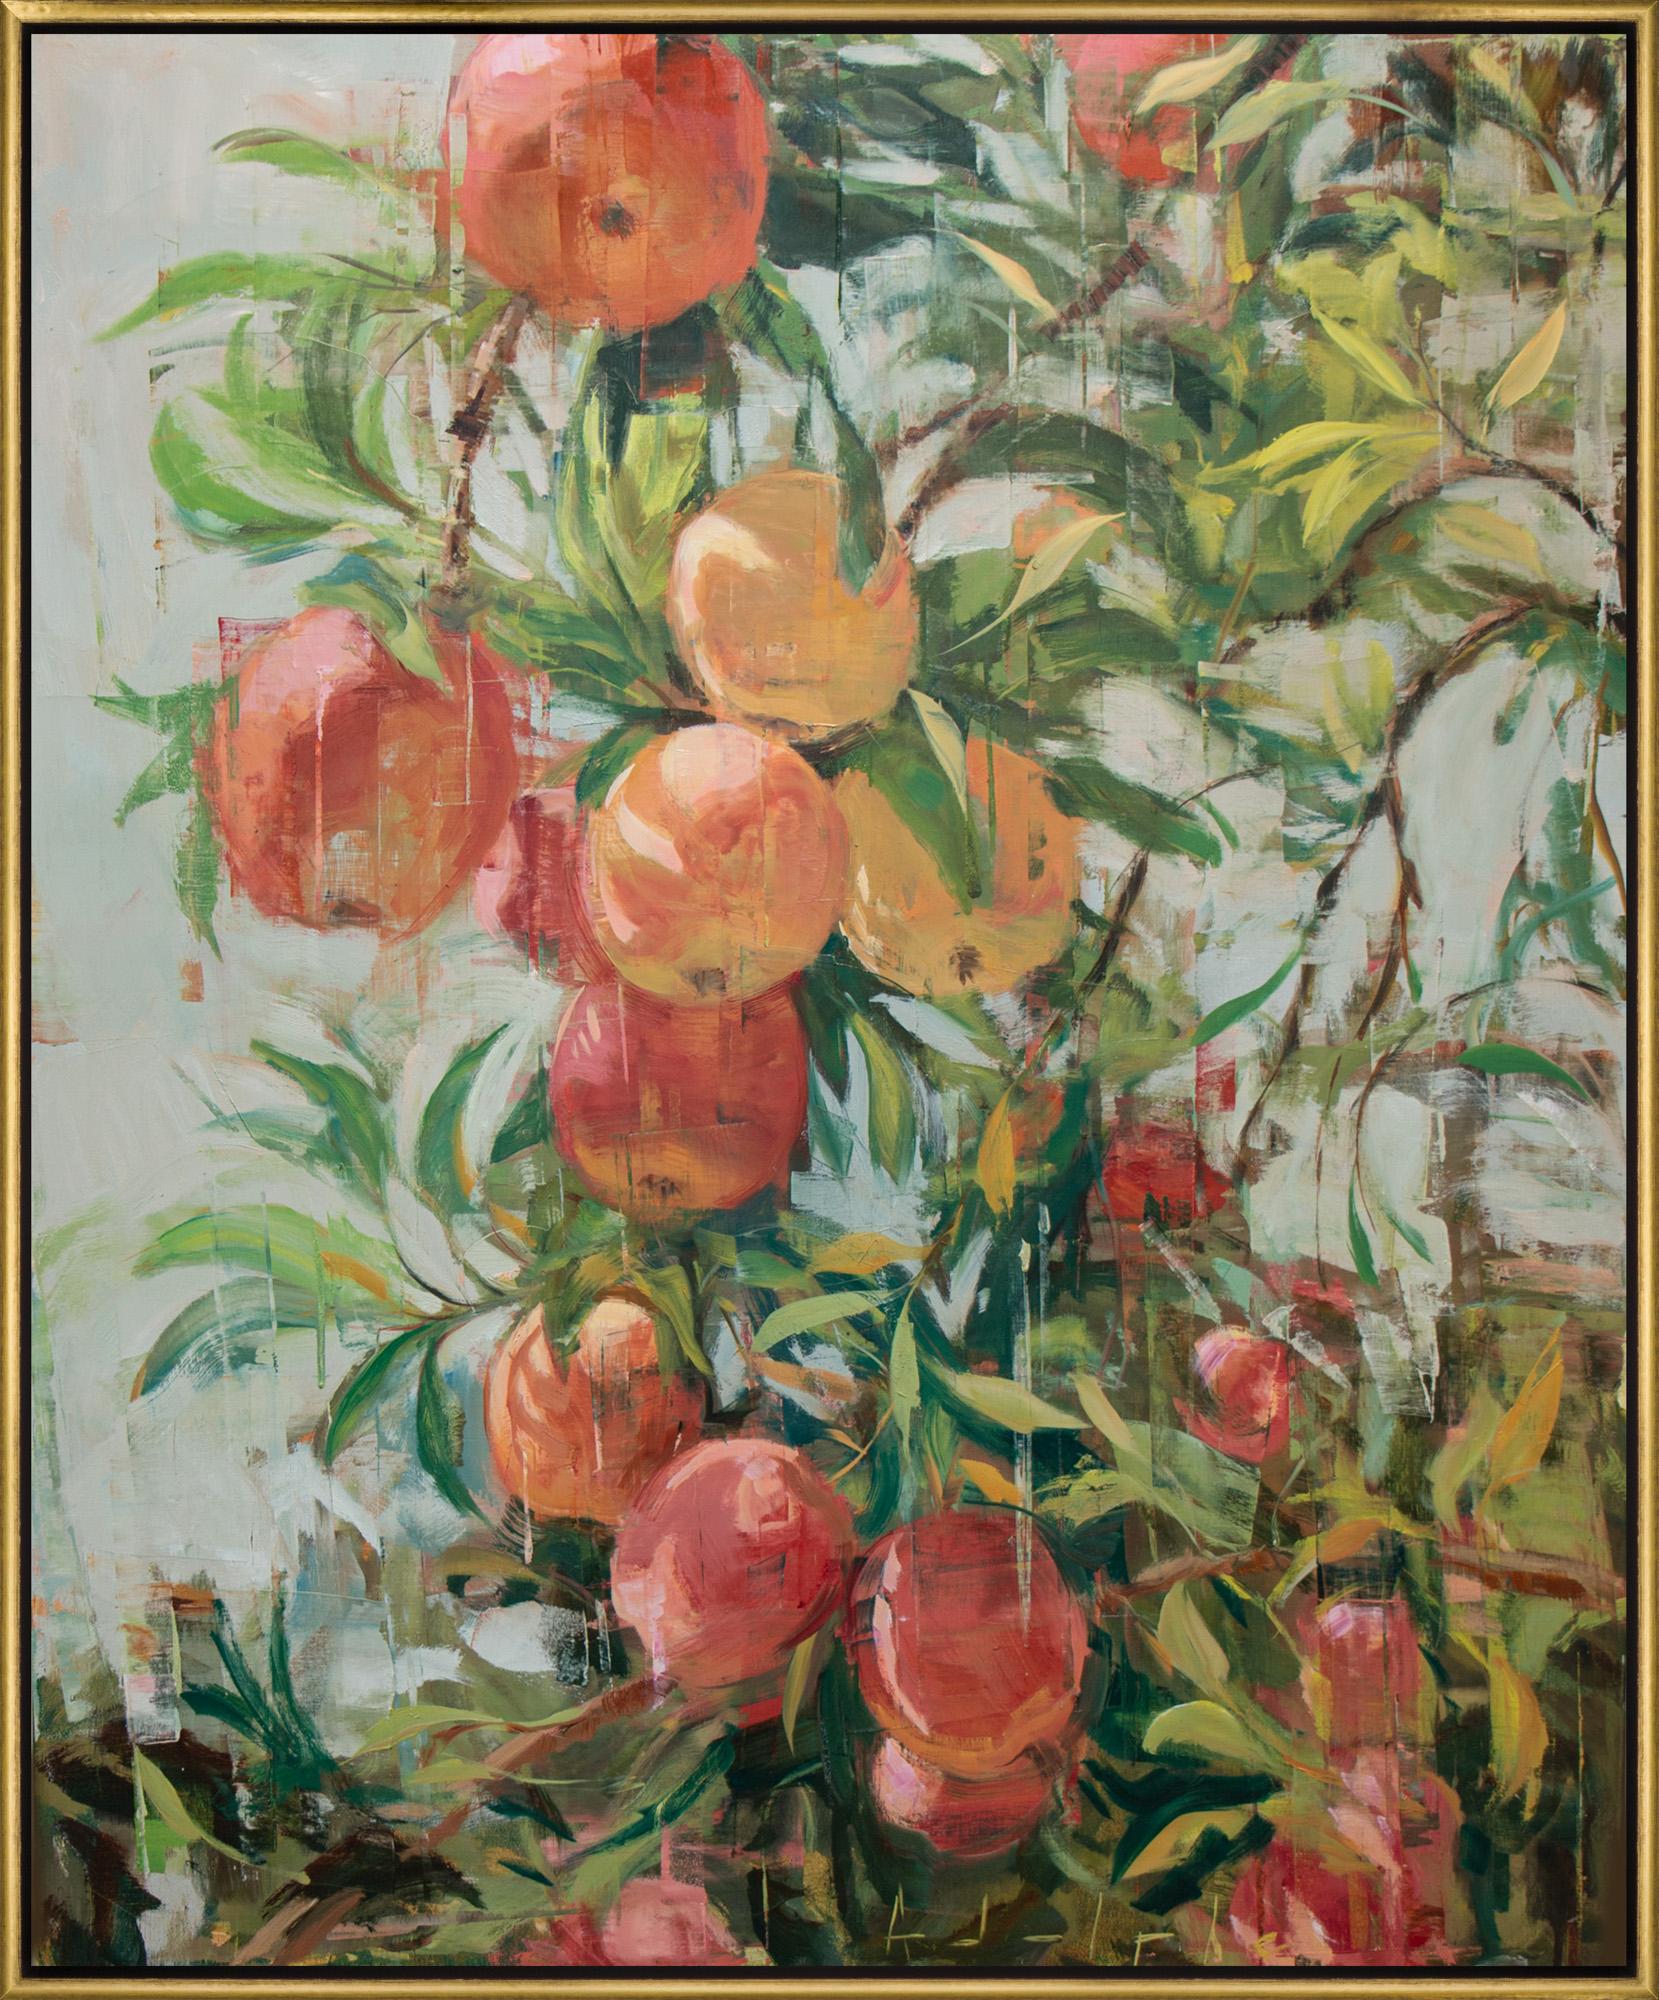 Joseph Adolphe Landscape Painting - "Ripe No. 8" Contemporary Peaches Floral Still Life Framed Oil on Canvas